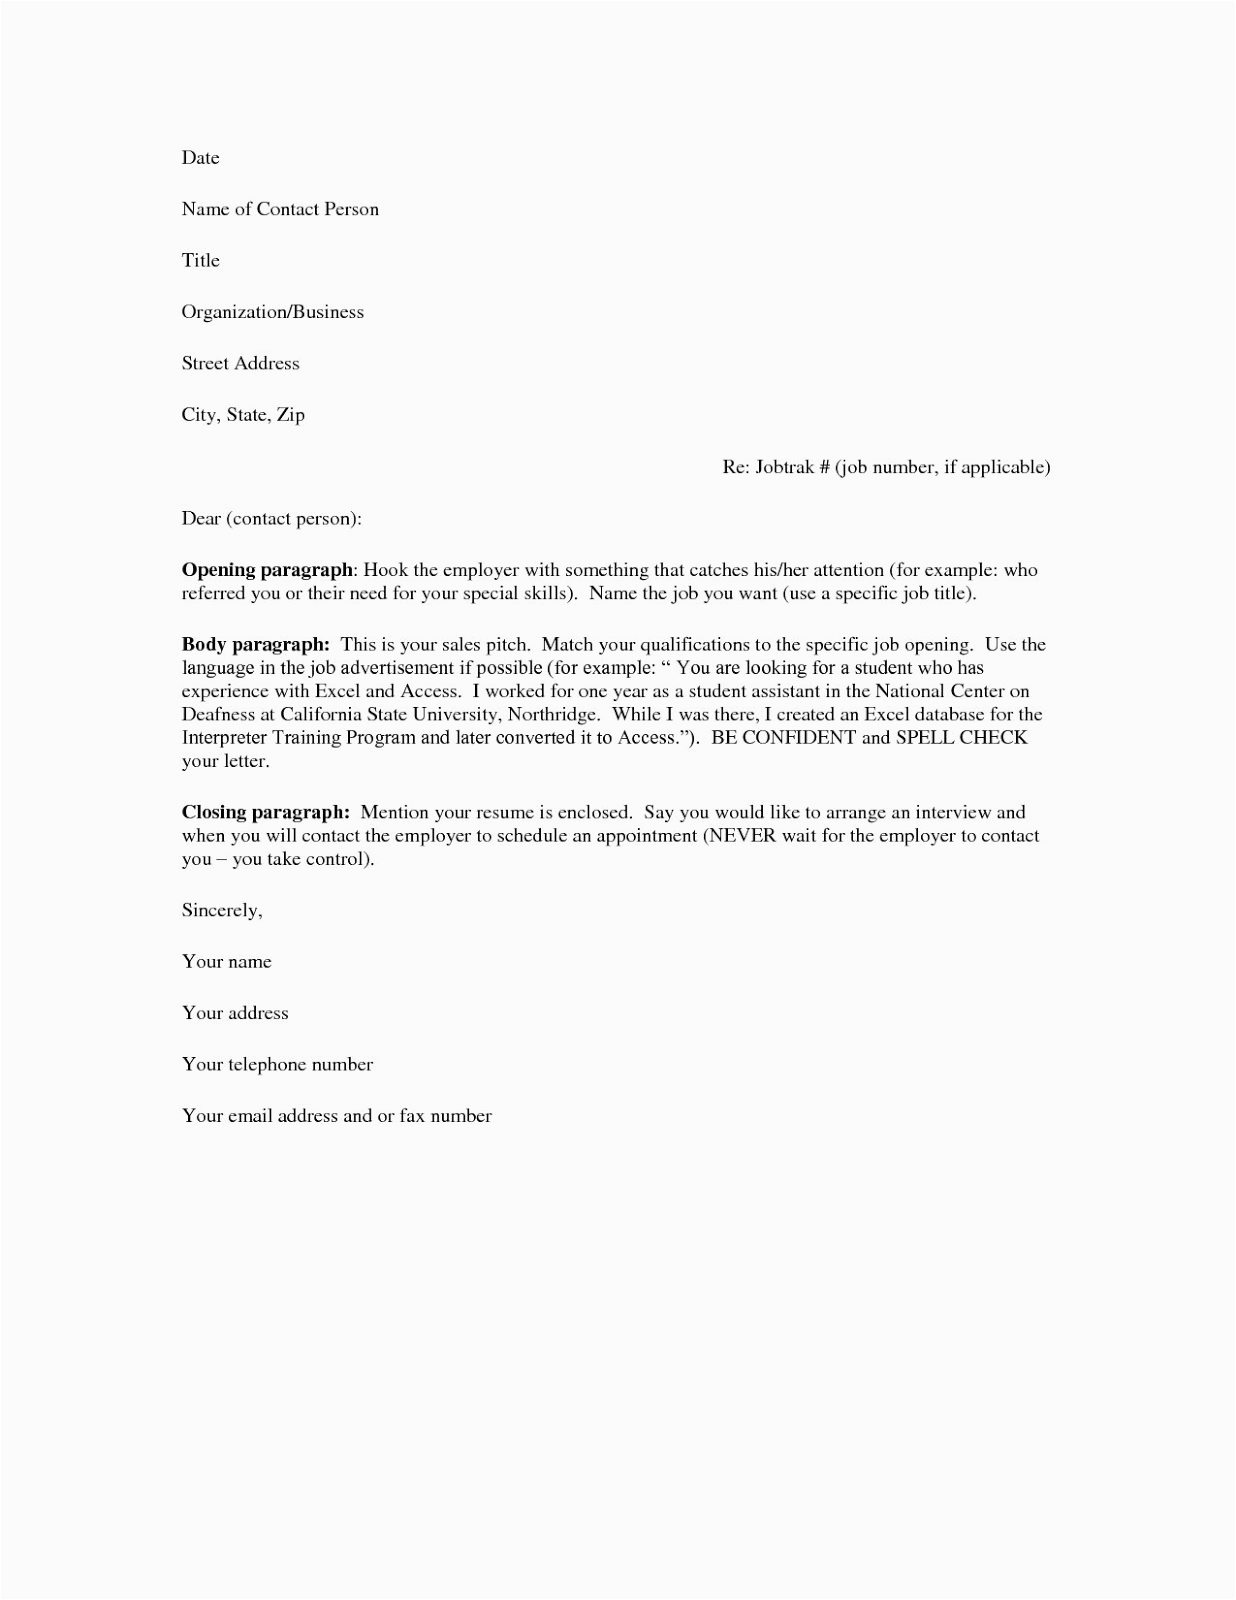 Professional Resume and Cover Letter Samples Free Cover Letter Samples for Resumes